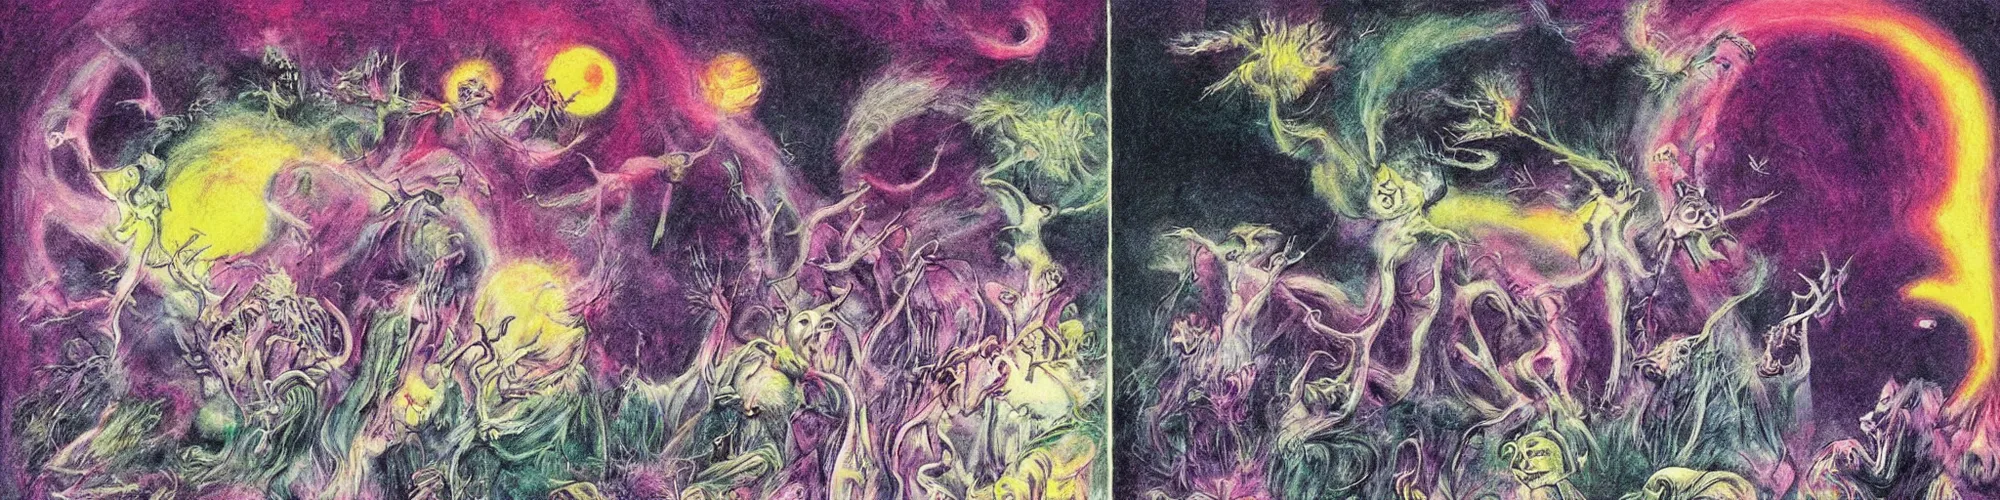 Prompt: dawn of creation ; first atom ; beings of light and darkness ; ethereal plane. bright neon colors. illustrated by maurice sendak and stephen gammell and junji ito and dr seuss